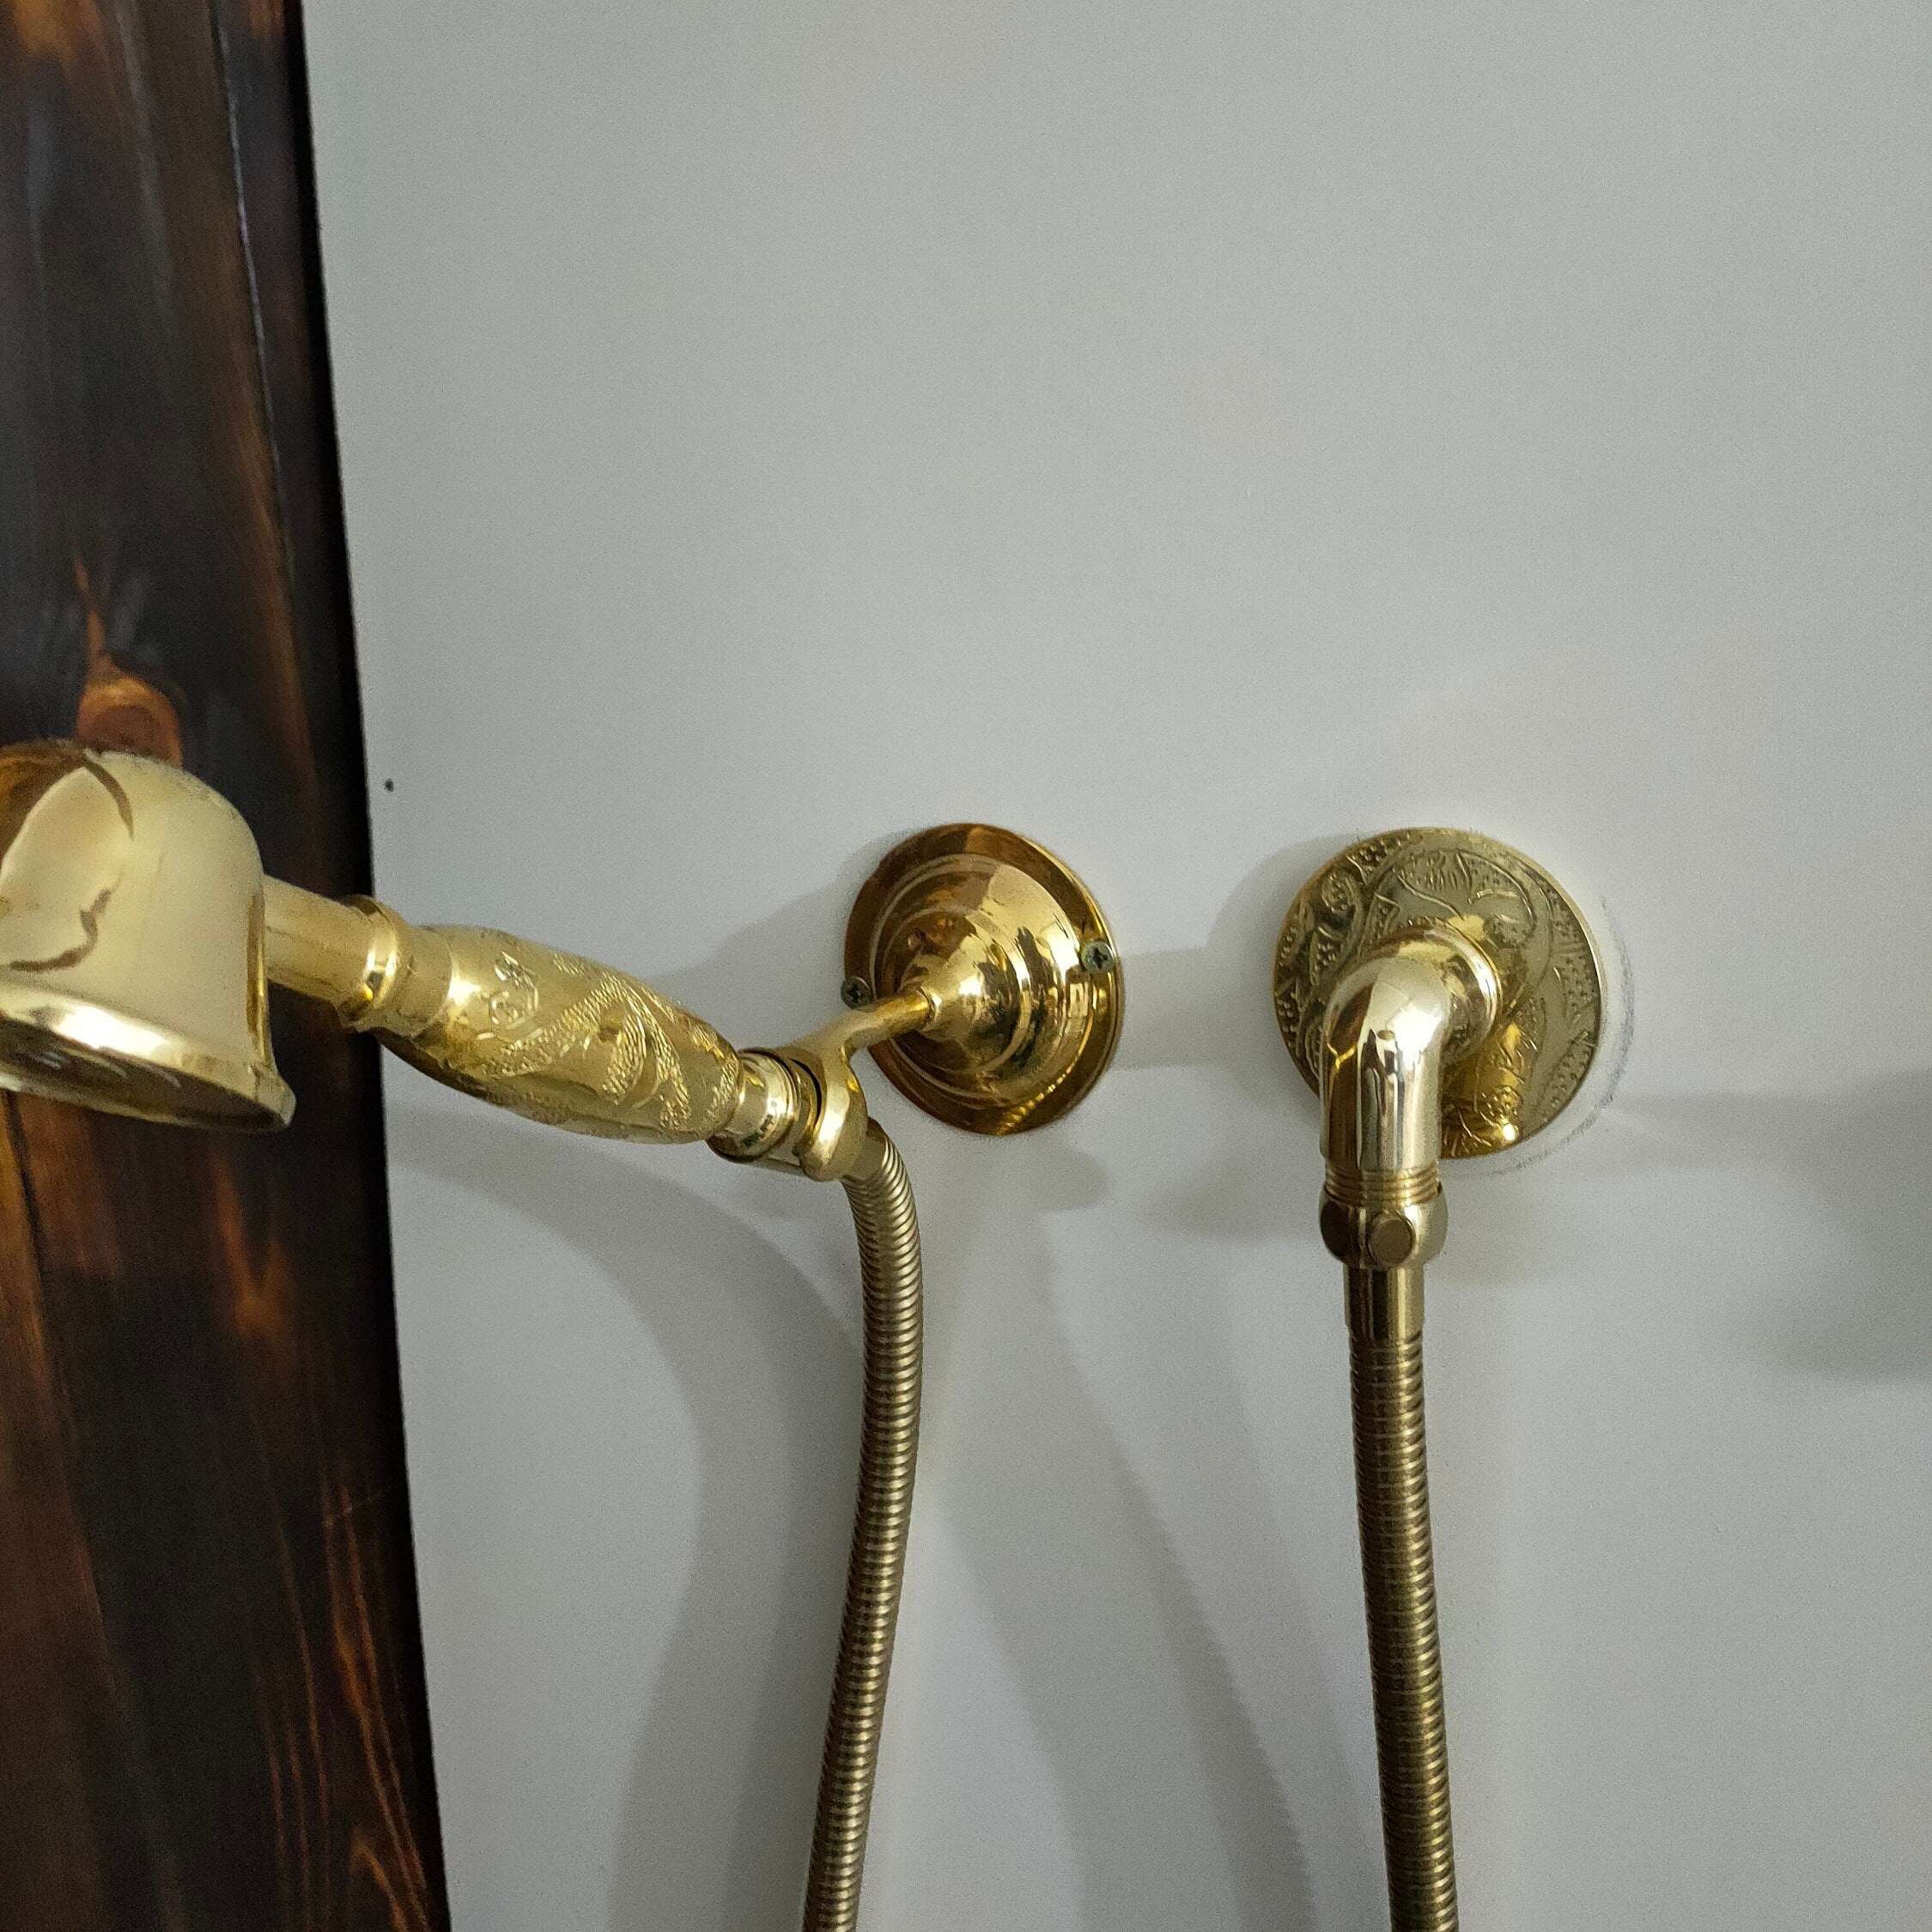 Shower Tub Faucet with Brass Finish